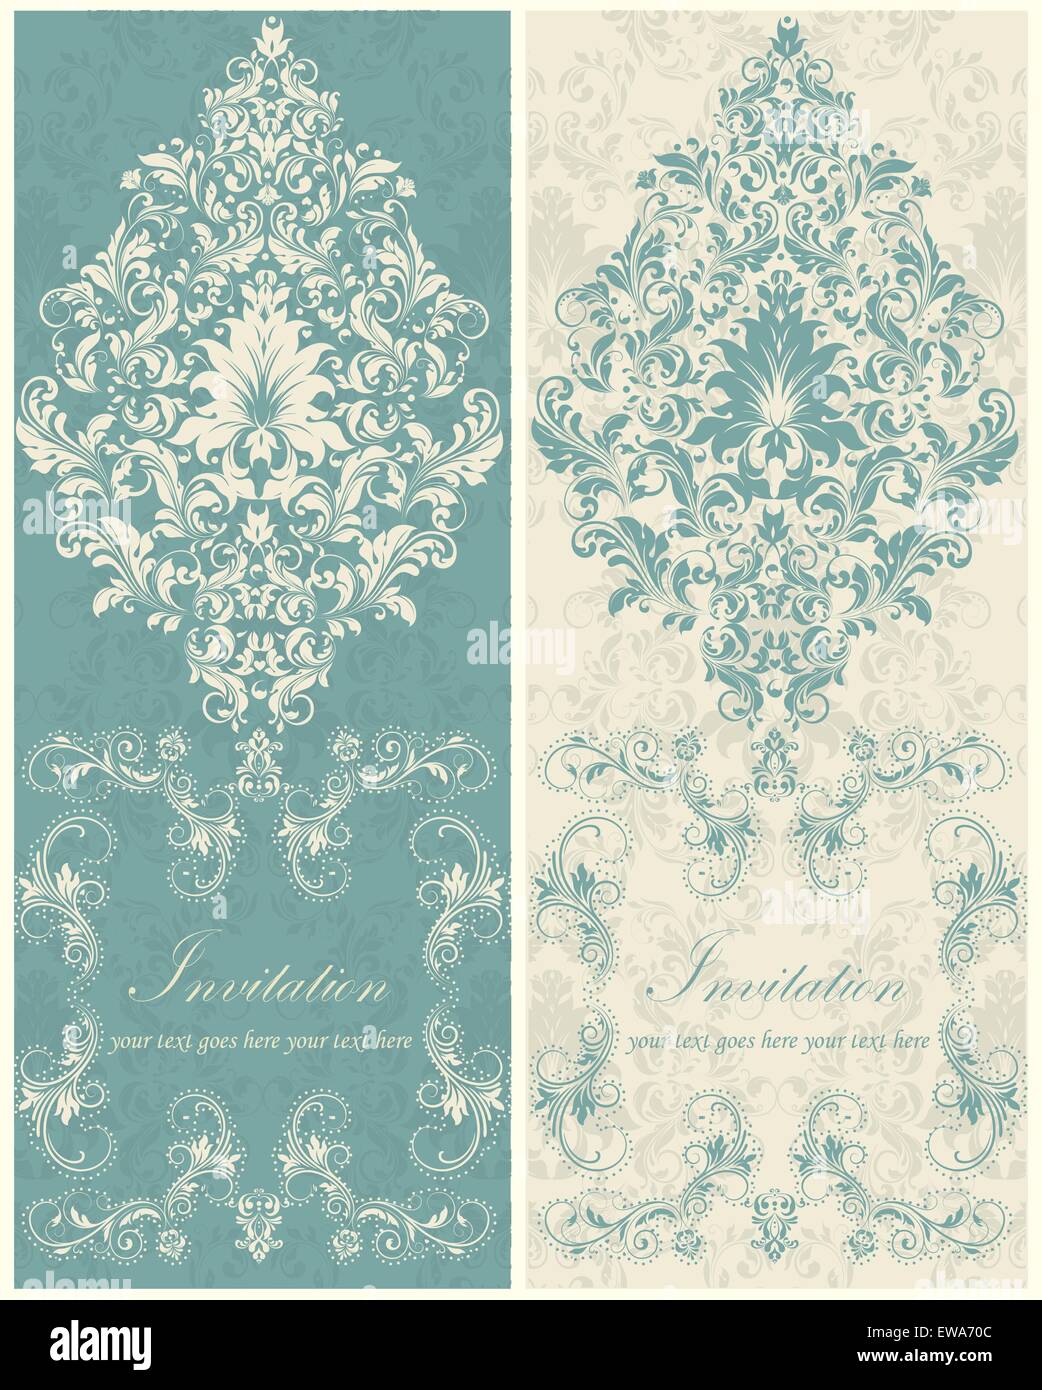 Set of two (2) vintage invitation cards with ornate elegant retro abstract floral design, beige flowers and leaves on dark teal Stock Vector